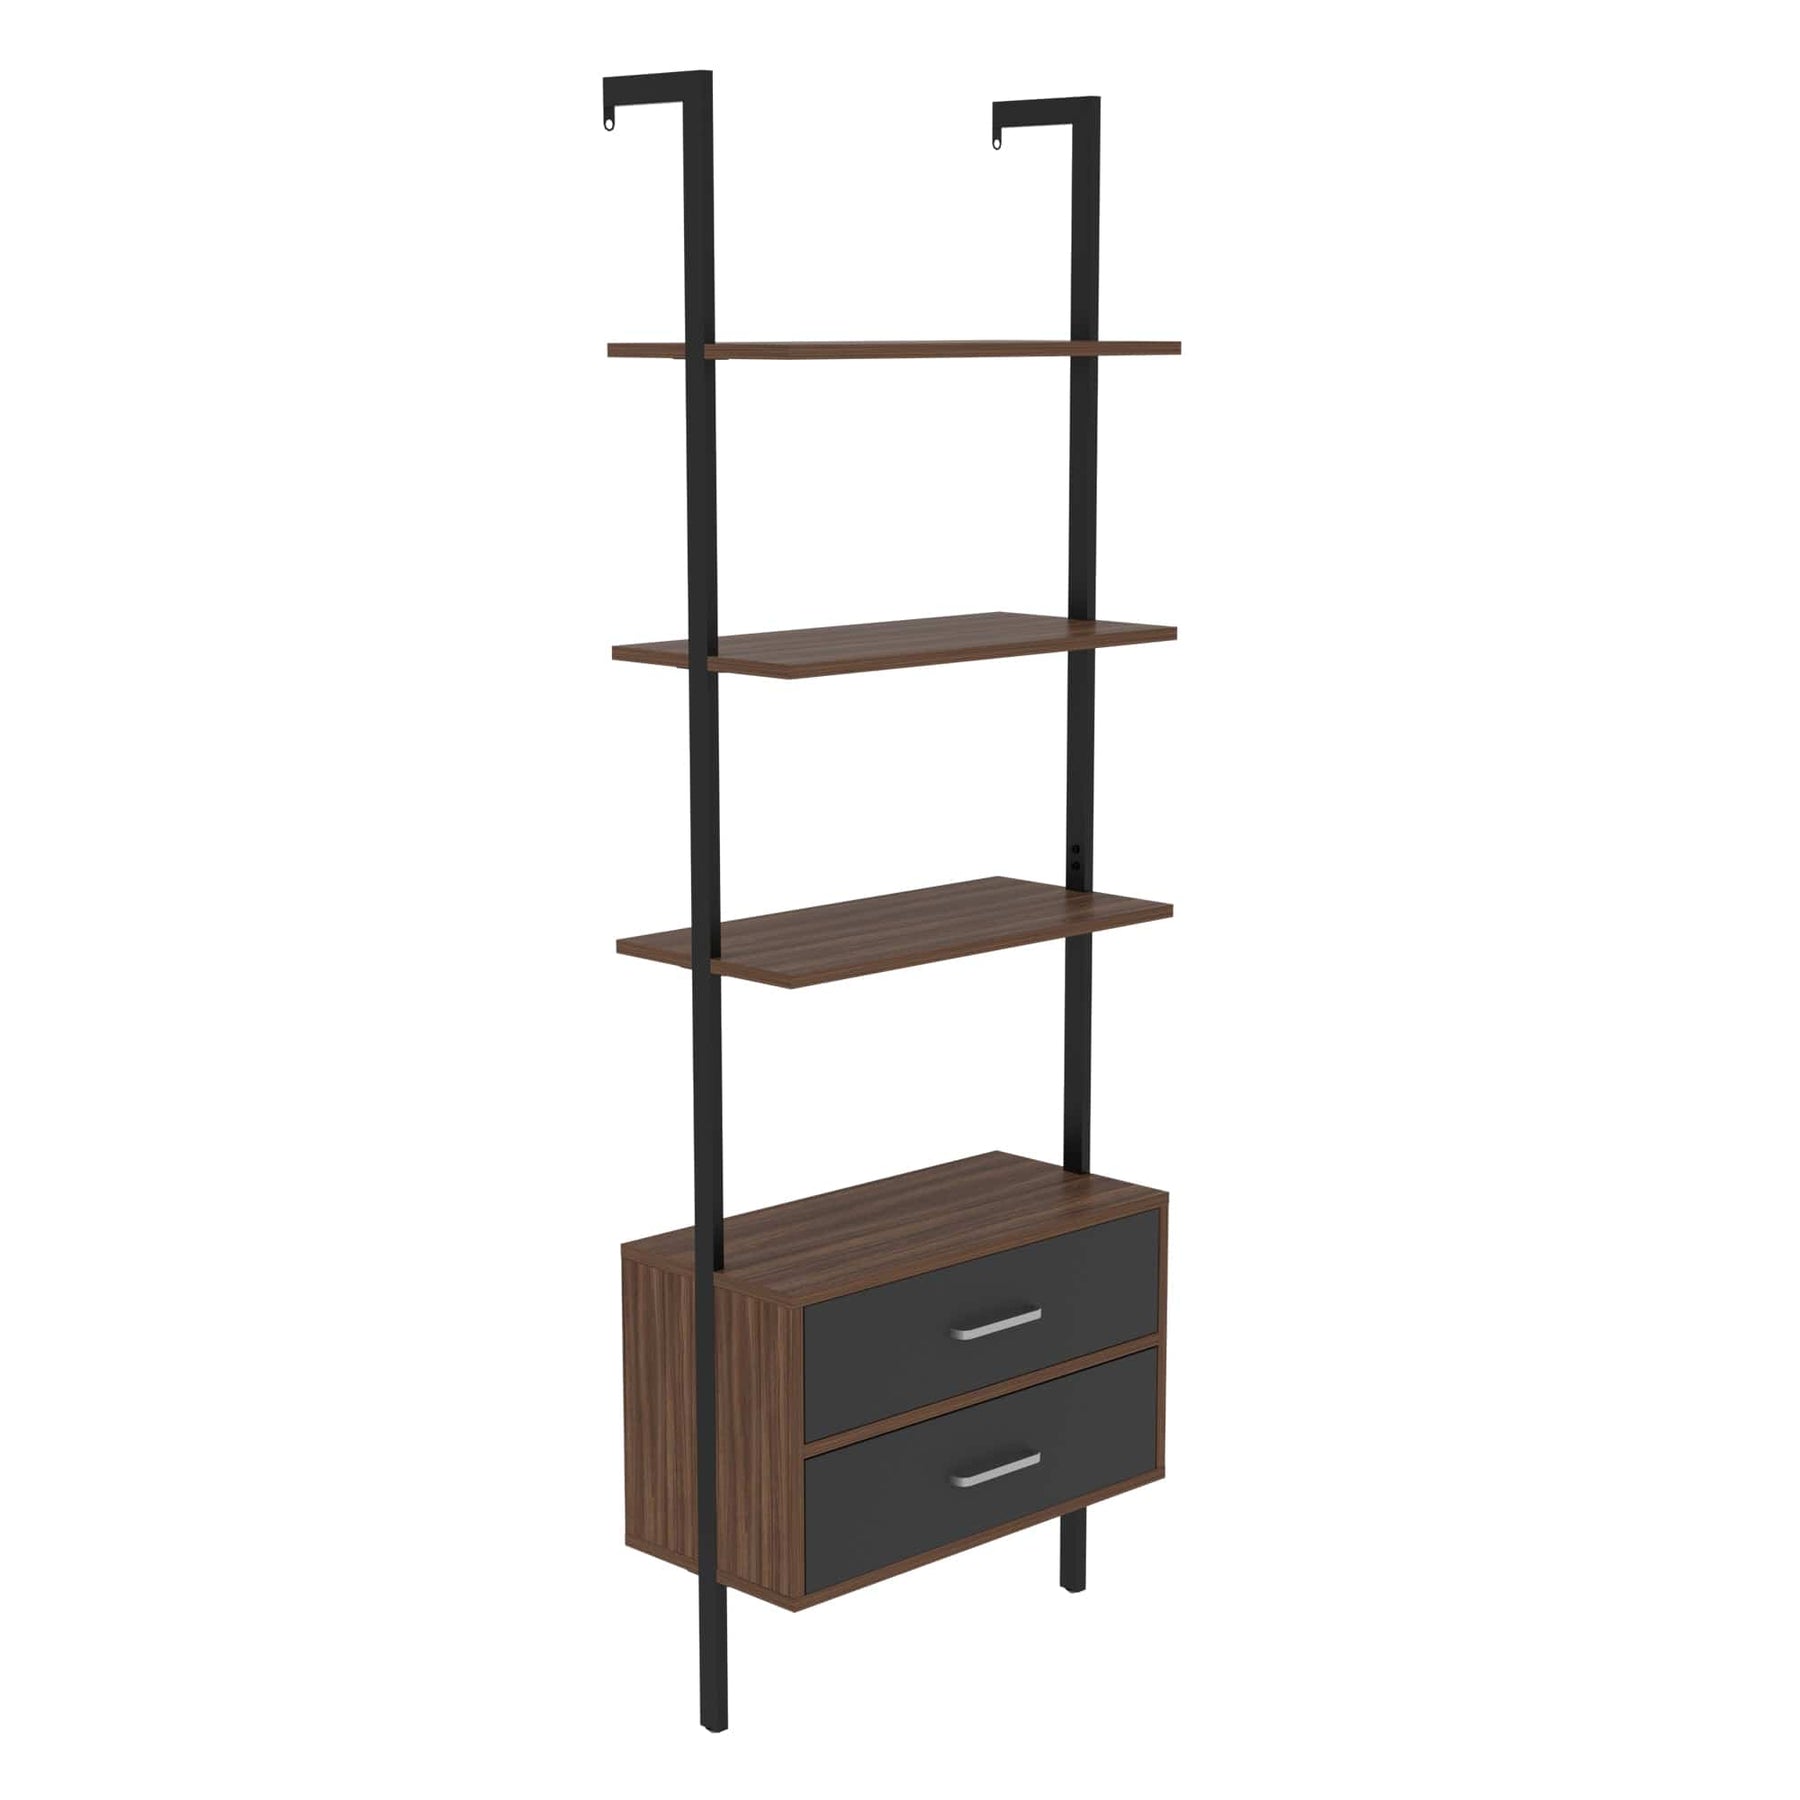 ShiningShow-Ladder-Bookcase-Vertical-Open-Space-Shelf-with-2-Drawers-Office-Bookshelf-Wall-Mount-Required-_walnut_-Provides-Storage-for-Artwork-Decorative-Figurines-and-Potted-Plants